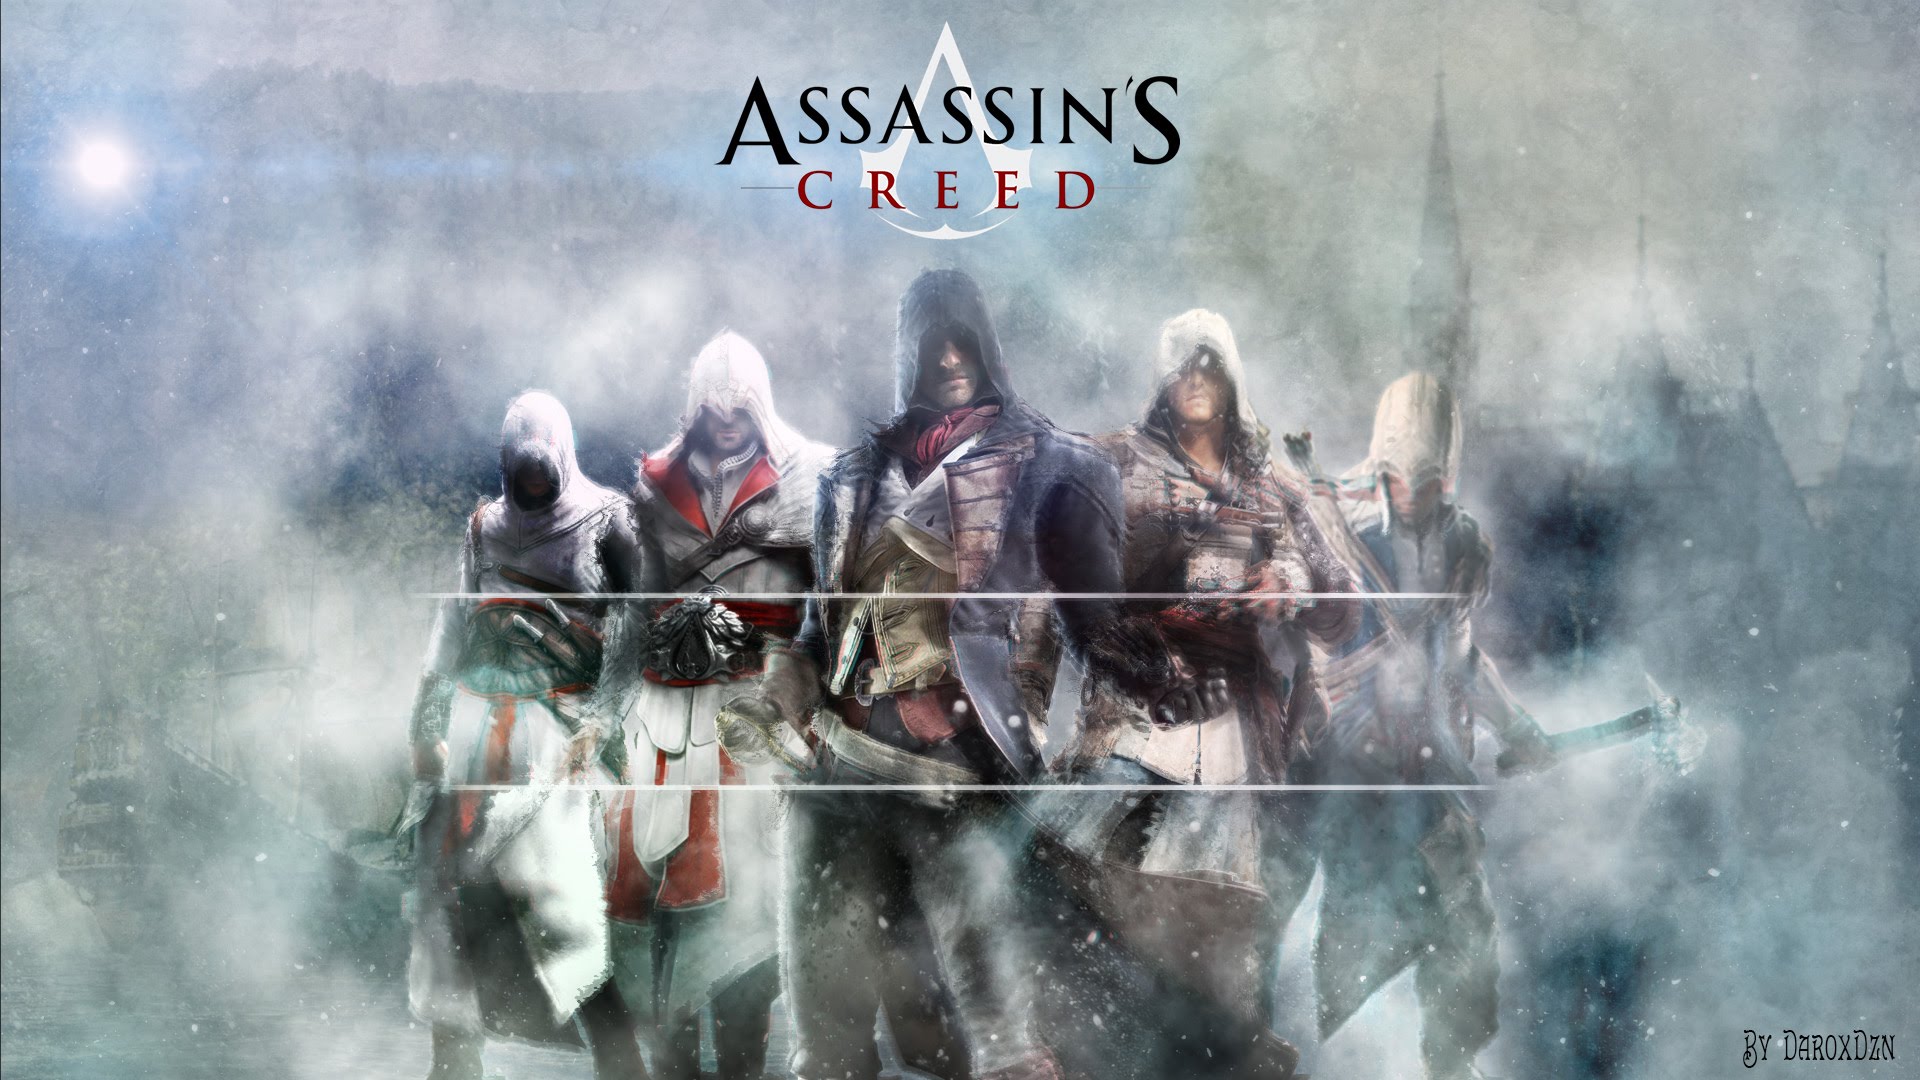 Assassin Creed Hd Wallpapers 1080p - Assassin's Creed Wallpapers Hd Download , HD Wallpaper & Backgrounds